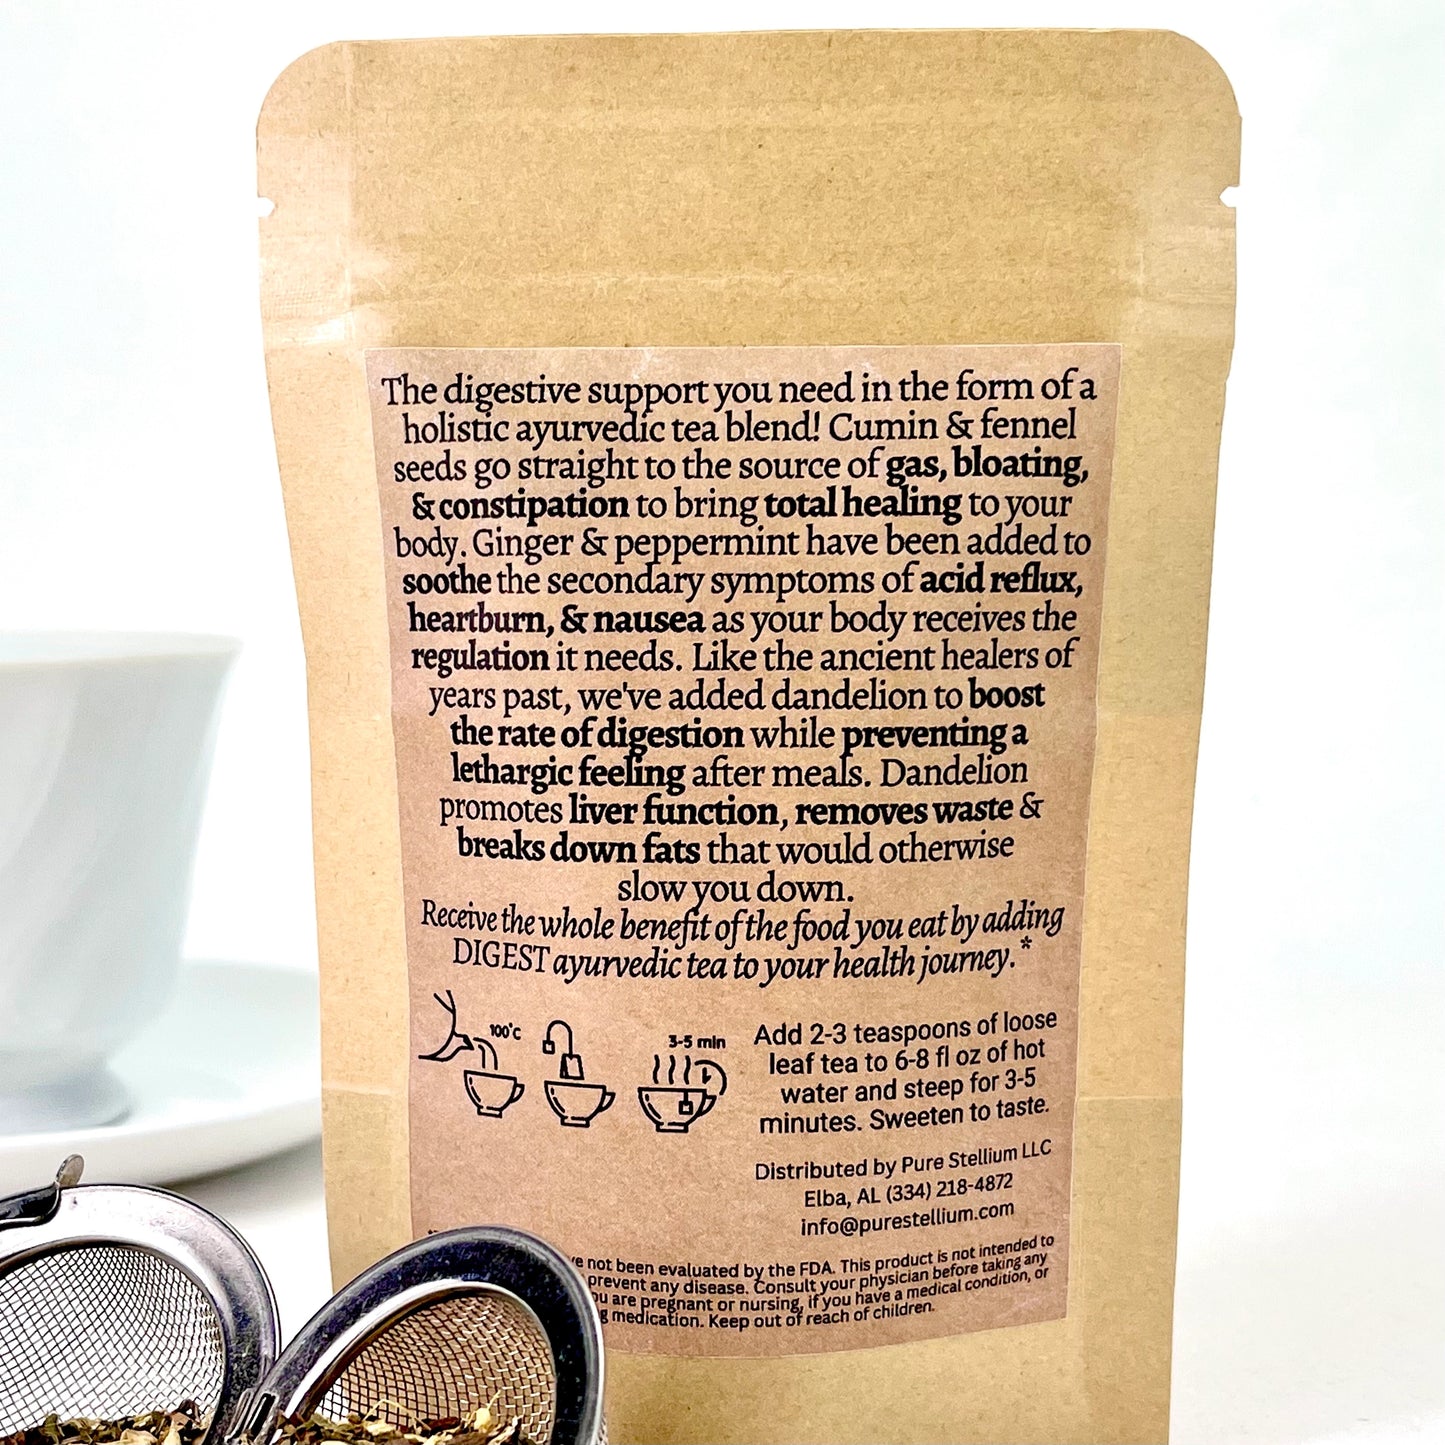 The package of Elemental Life Product's Digest loose leaf tea with raw ingredients